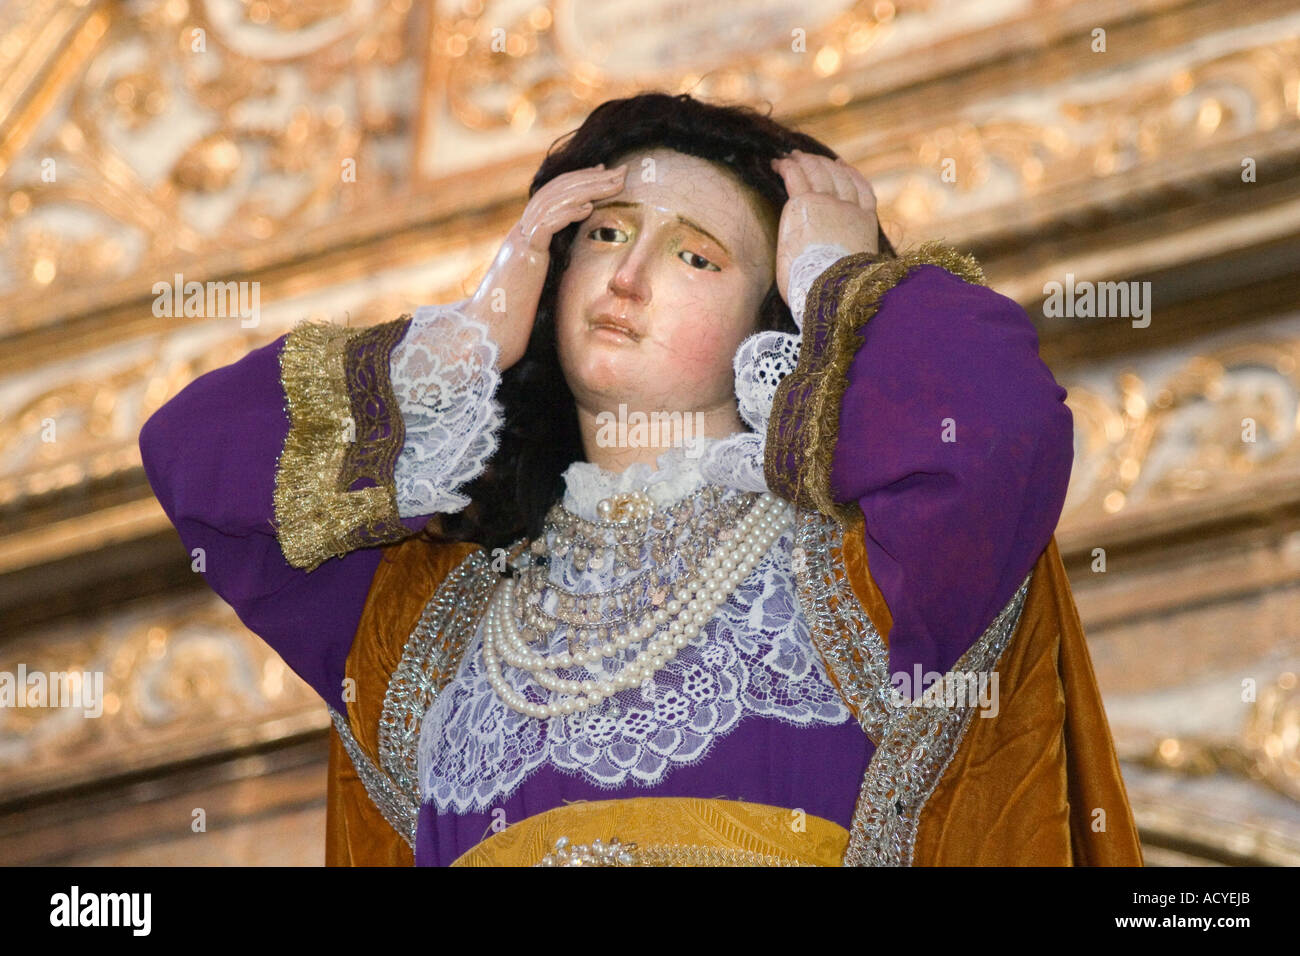 Statue of MARY MAGDALENE ready for Easter Procession in the TEMPLO DEL ORATORIO in SAN MIGUEL DE ALLENDE MEXICO Stock Photo